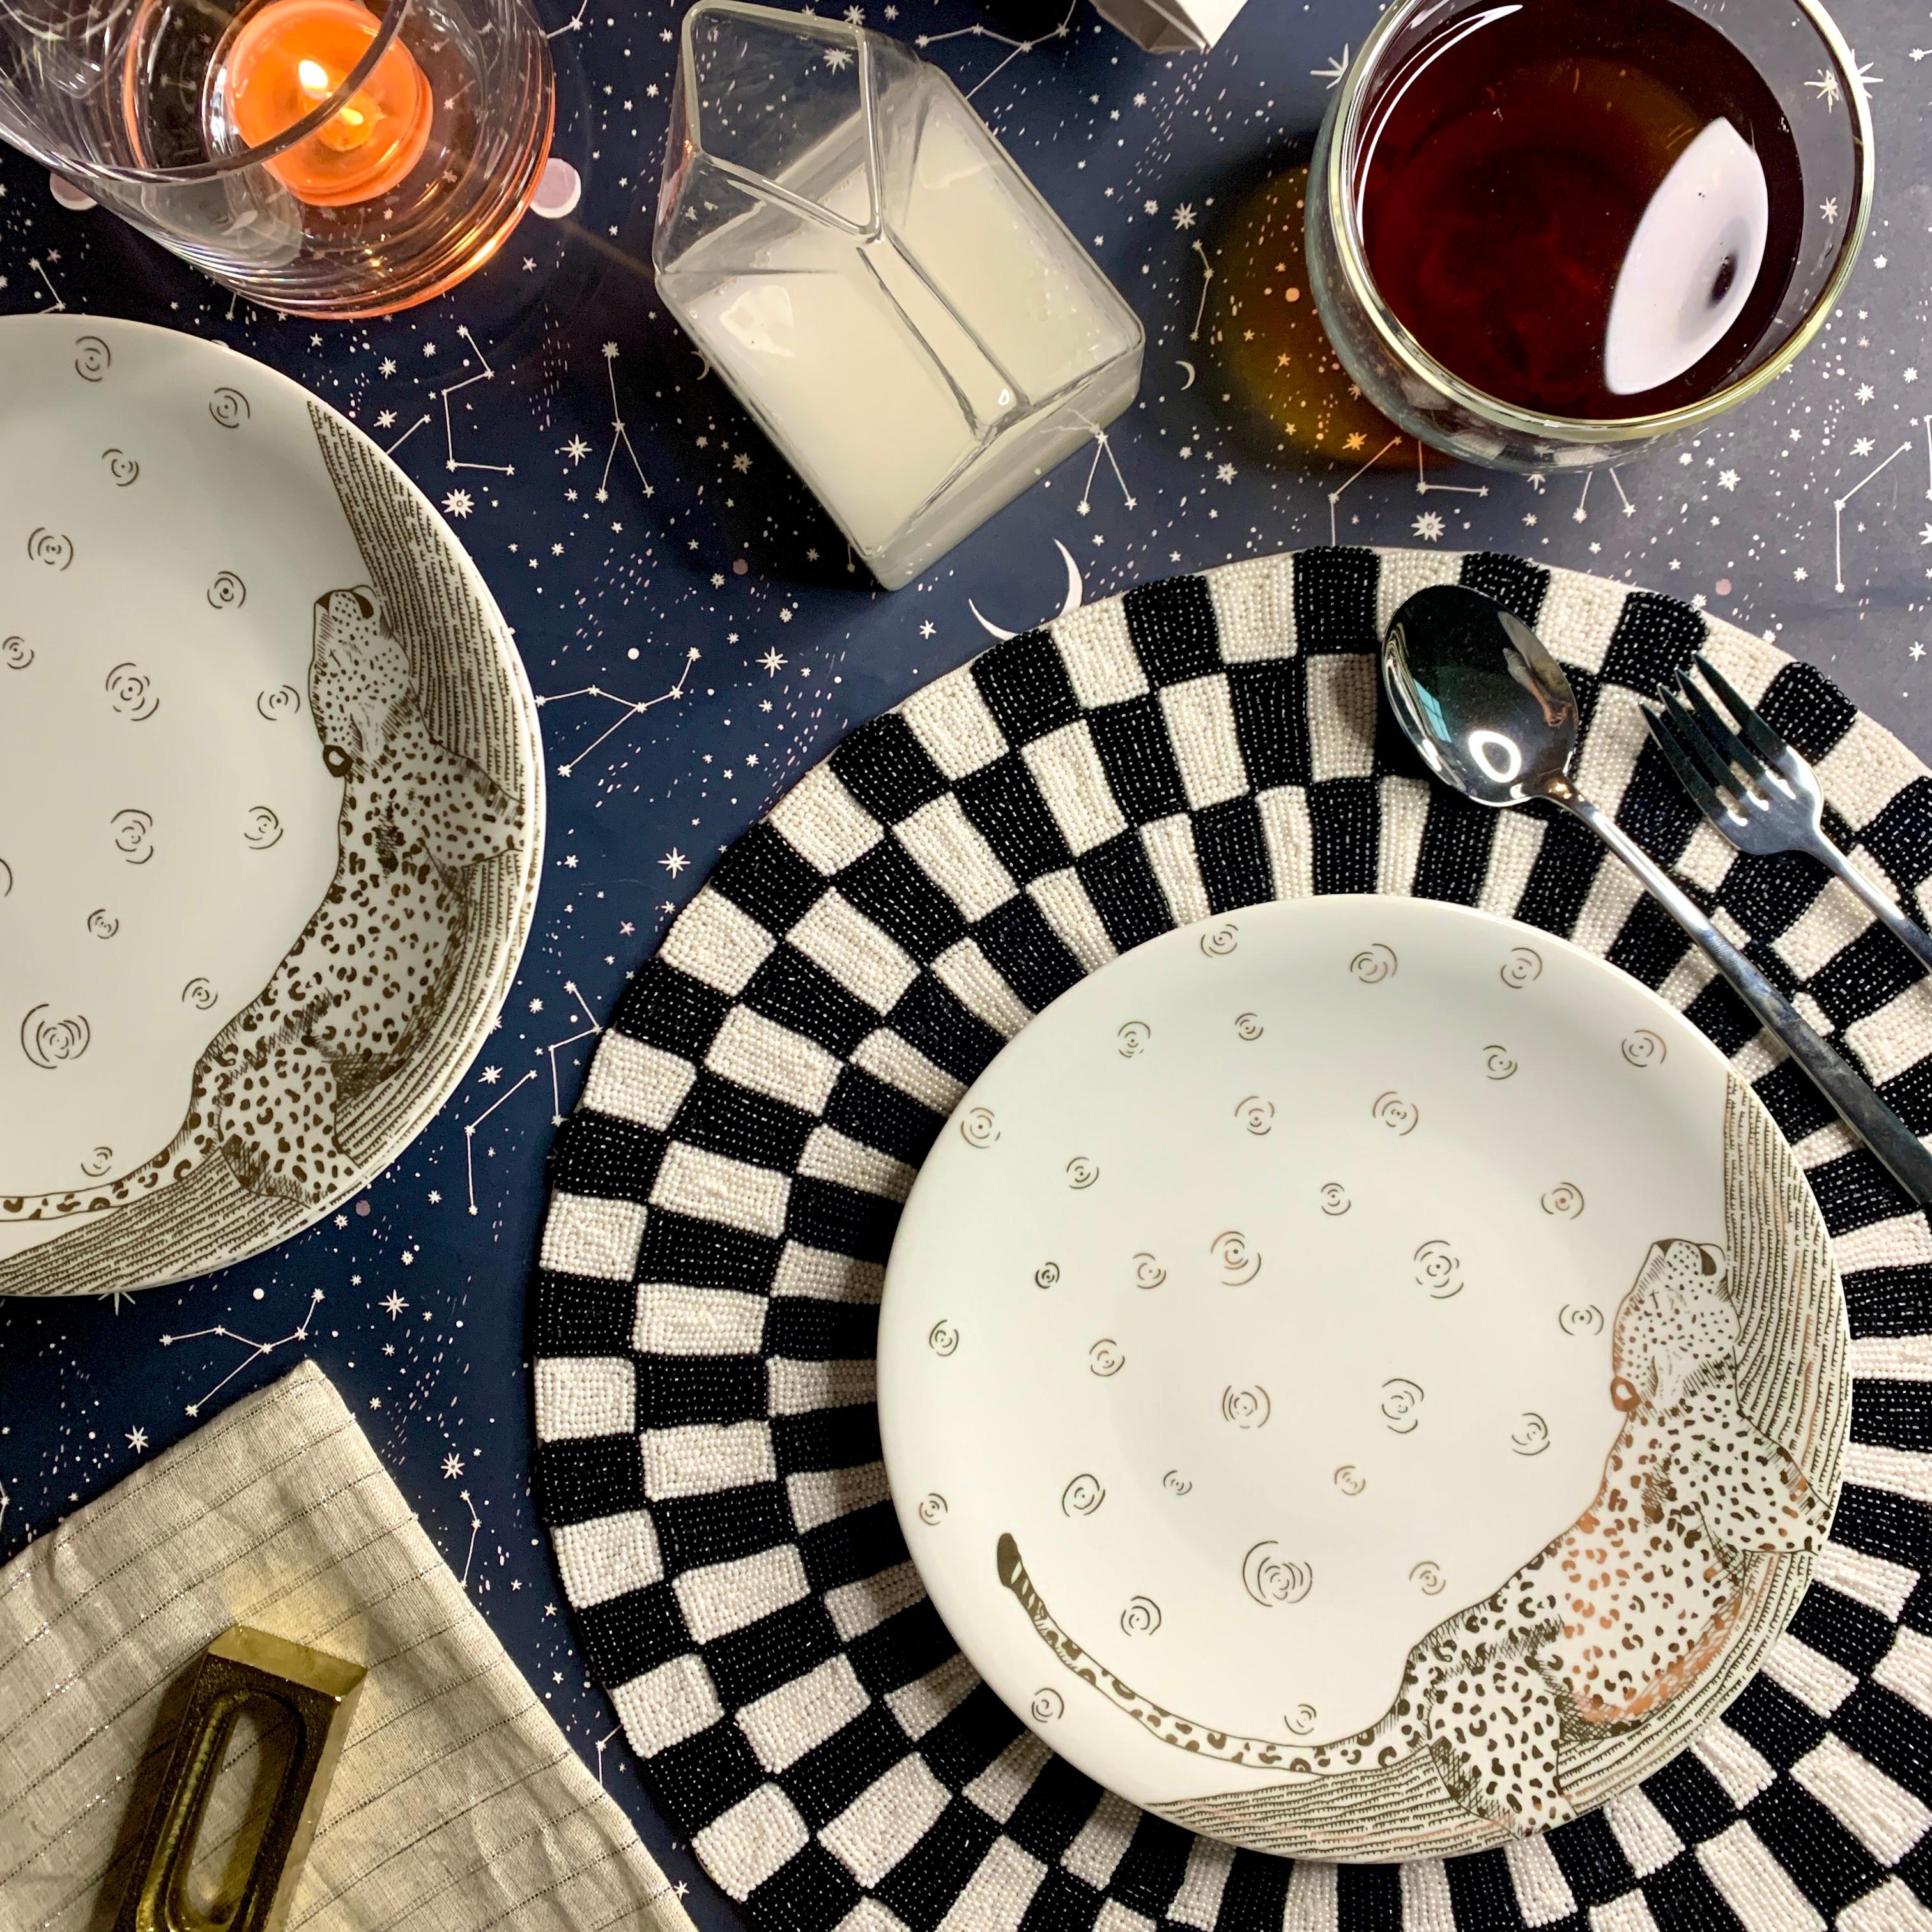 The Les Navas Dessert Set features a hand-painted guilded leopard in 12k Gold under the night sky. The activities of this great animal are showcased in the motif of this set. Playful, chic and dynamic- this dinner set will shine on your dinner